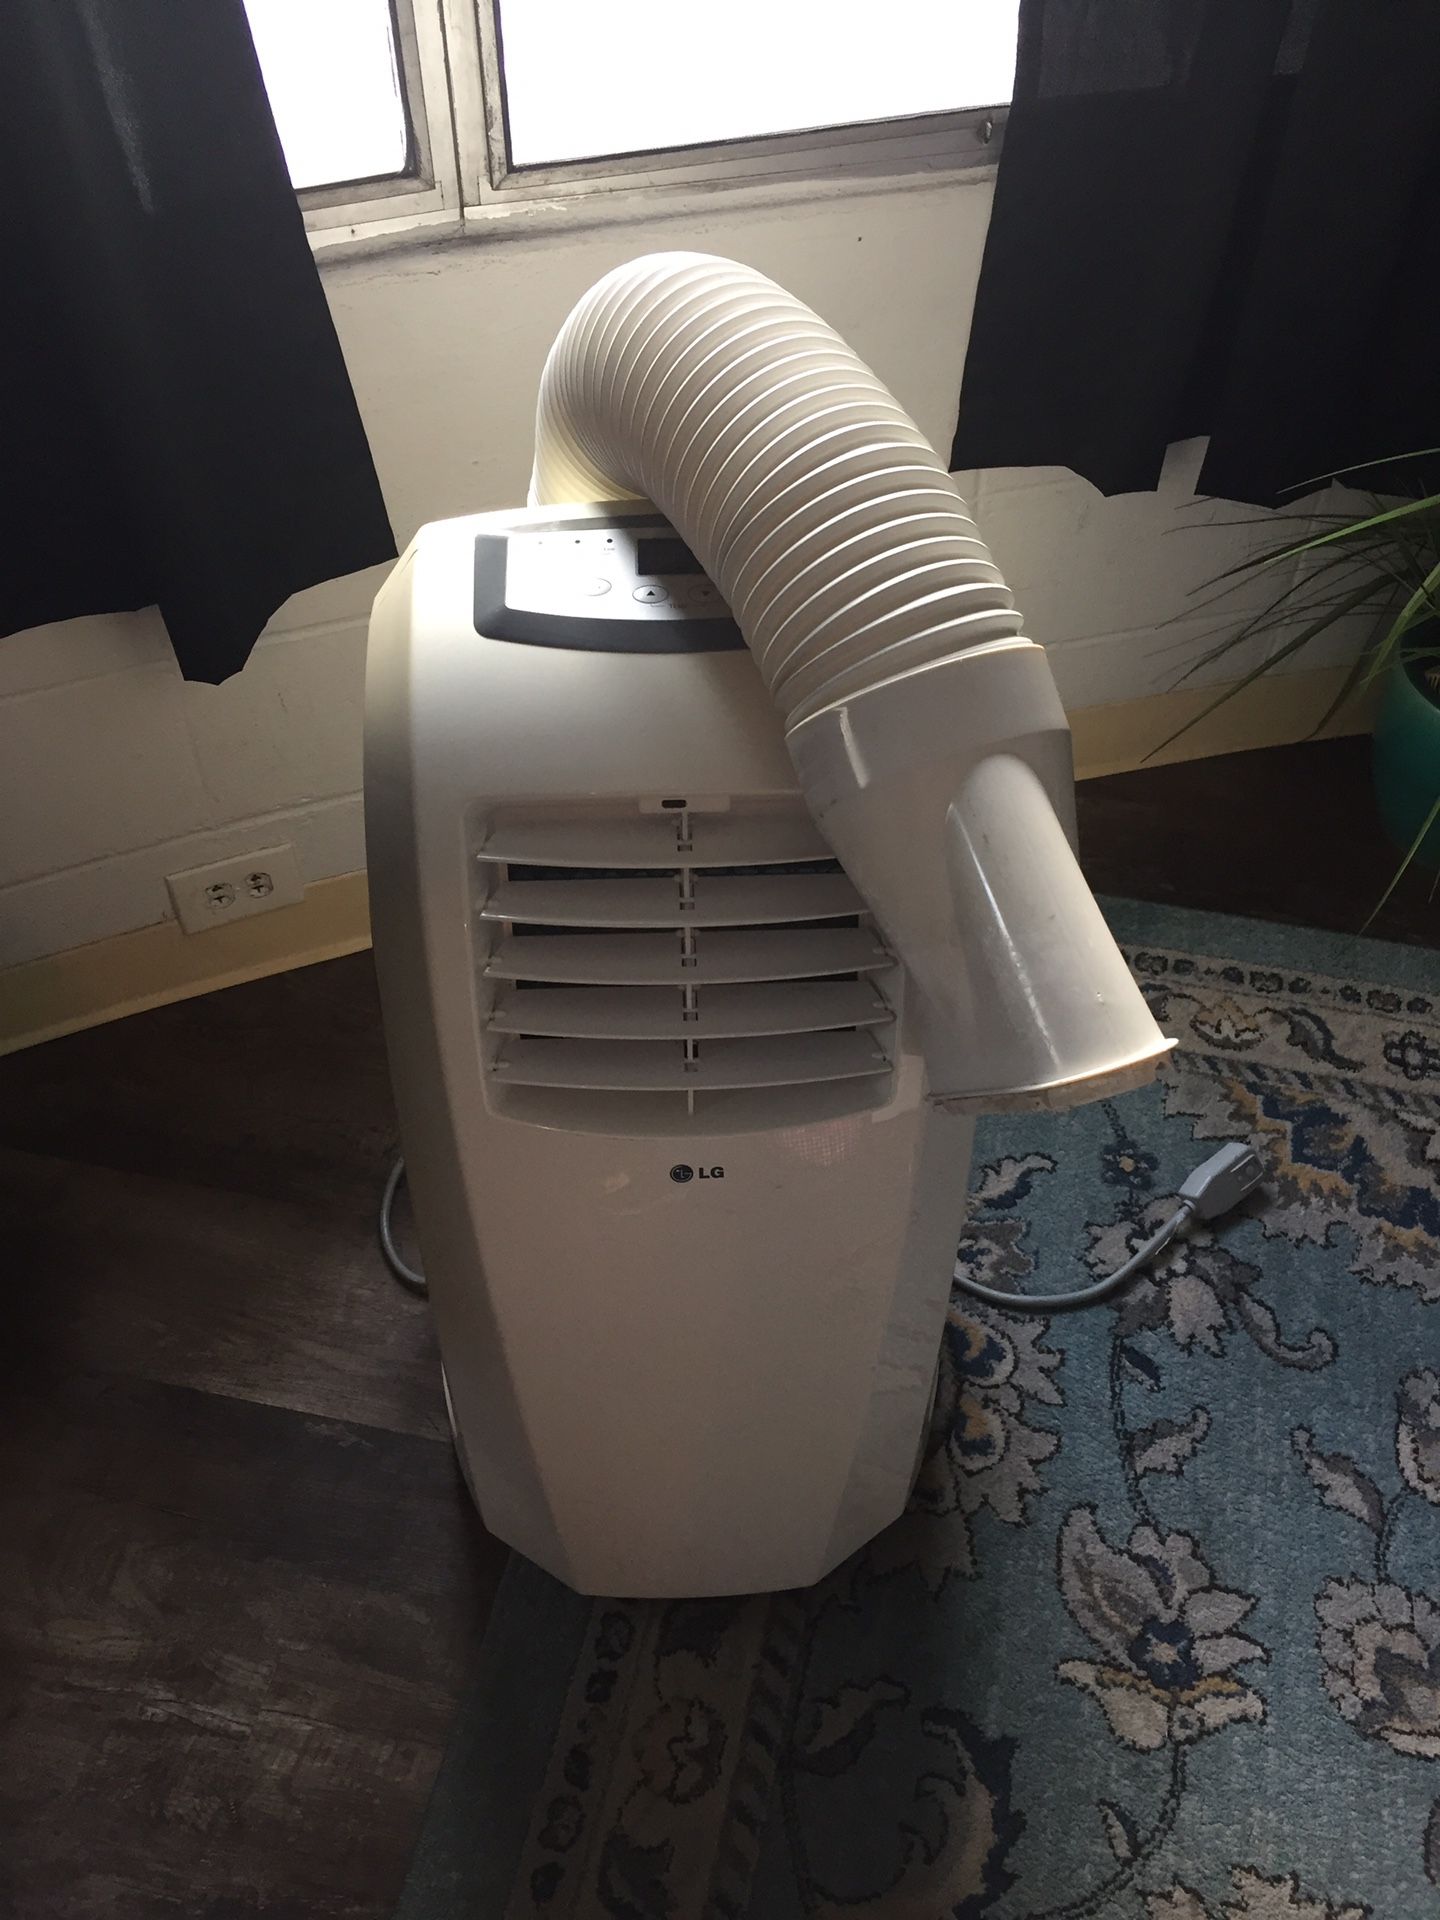 LG PORTABLE AC 10,000 BTU WORKS PERFECT and have 3 other units